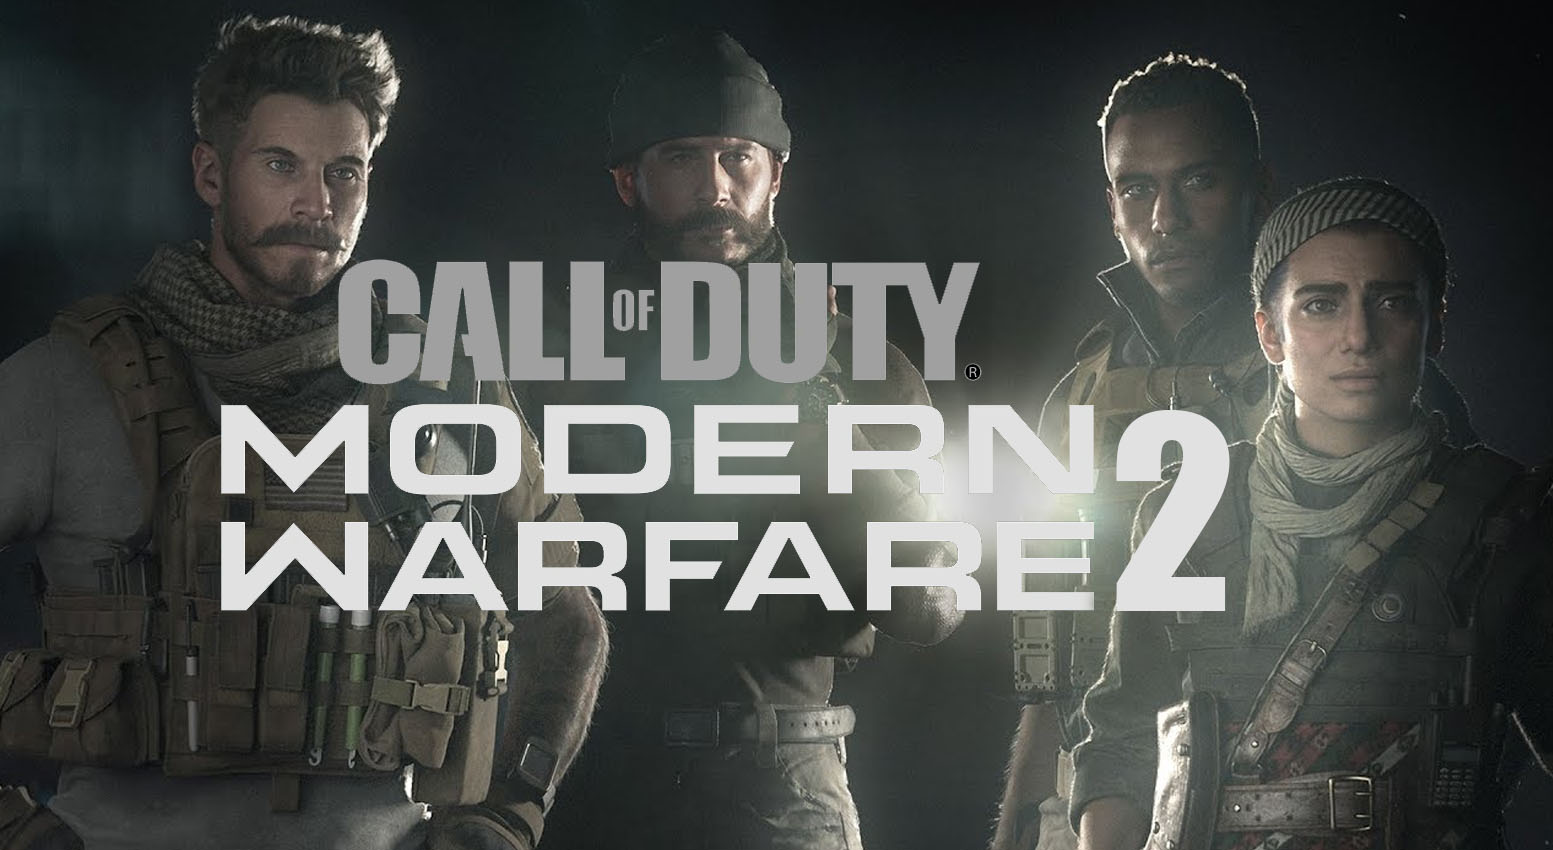 Name Confusion Abounds - COD 2022 to be Called Modern Warfare II?